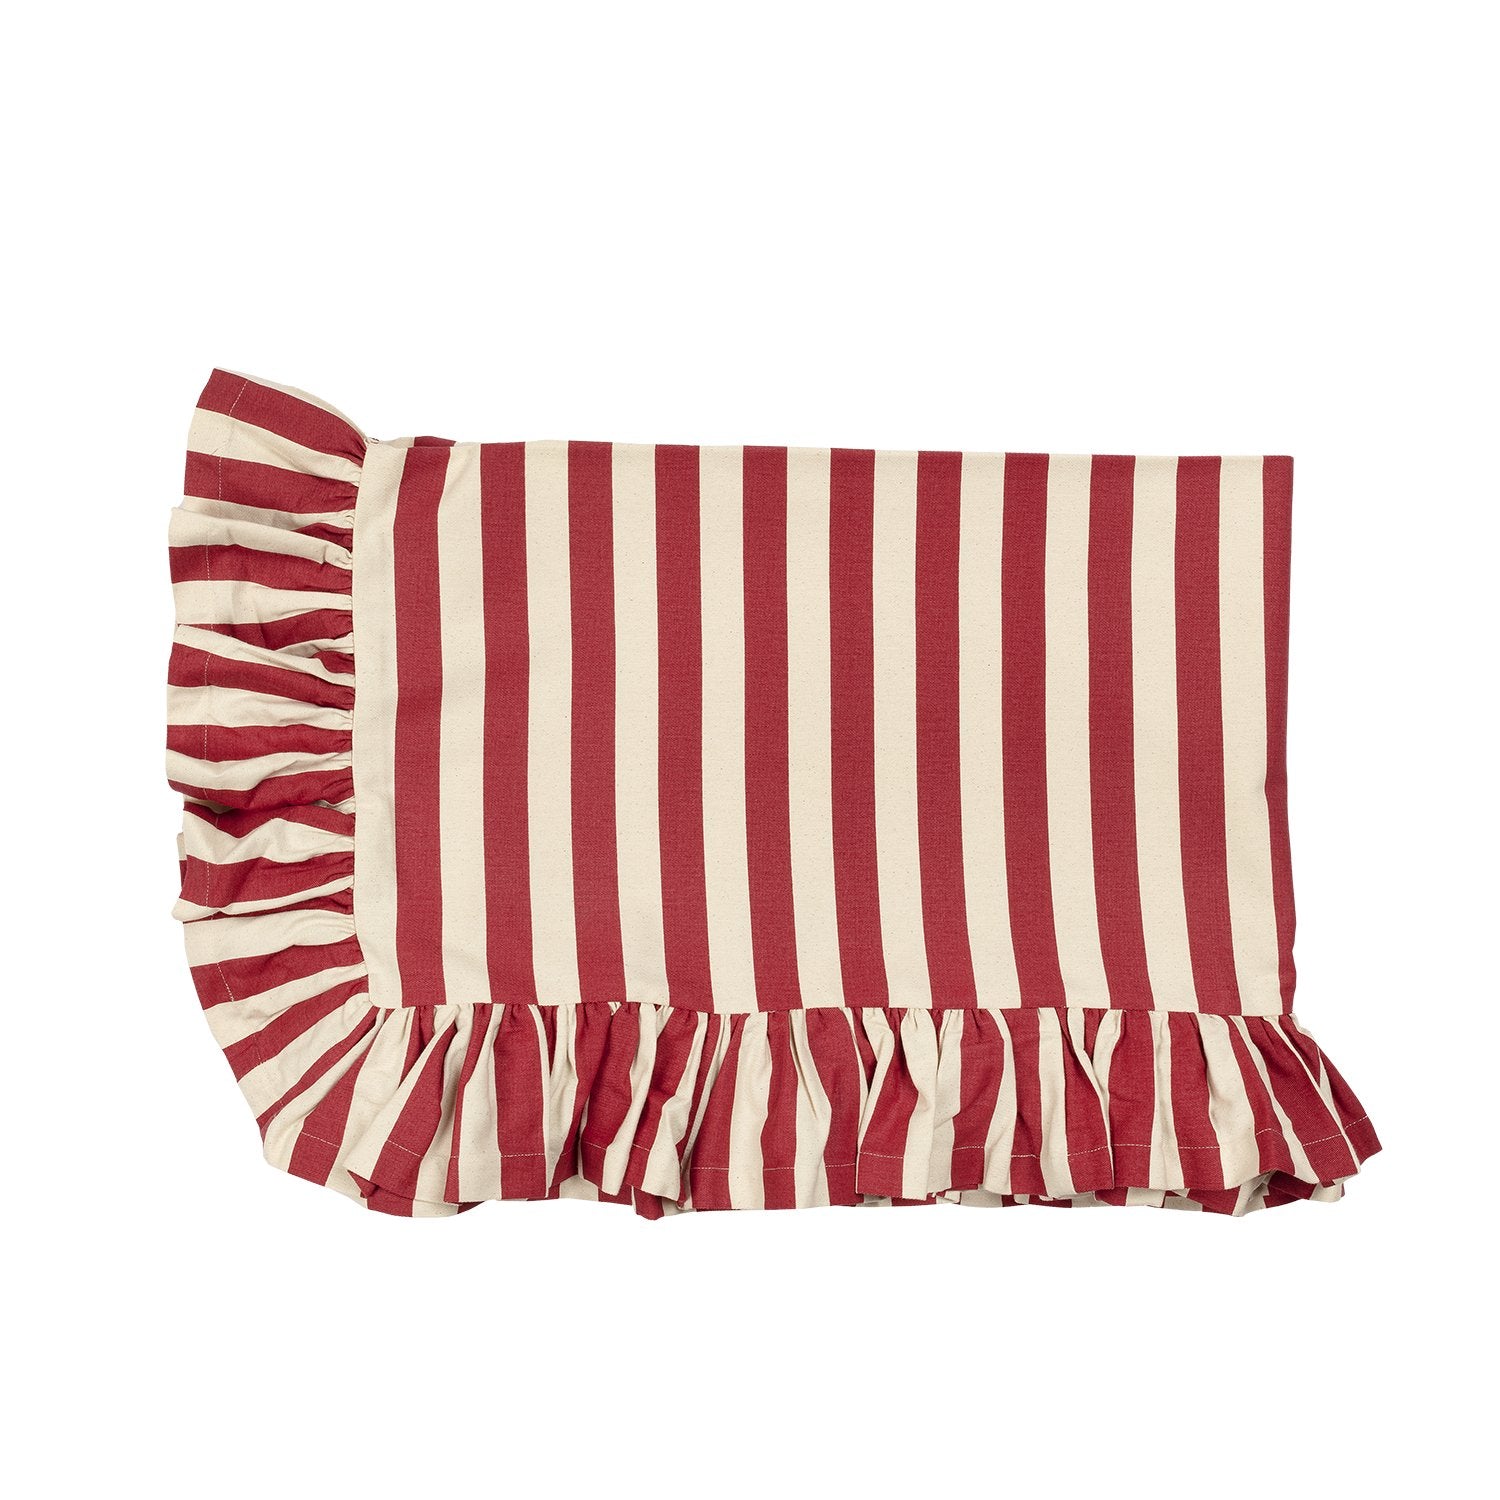 Tangier Red Stripe Ruffle Tablecloth - Alice Palmer & Co